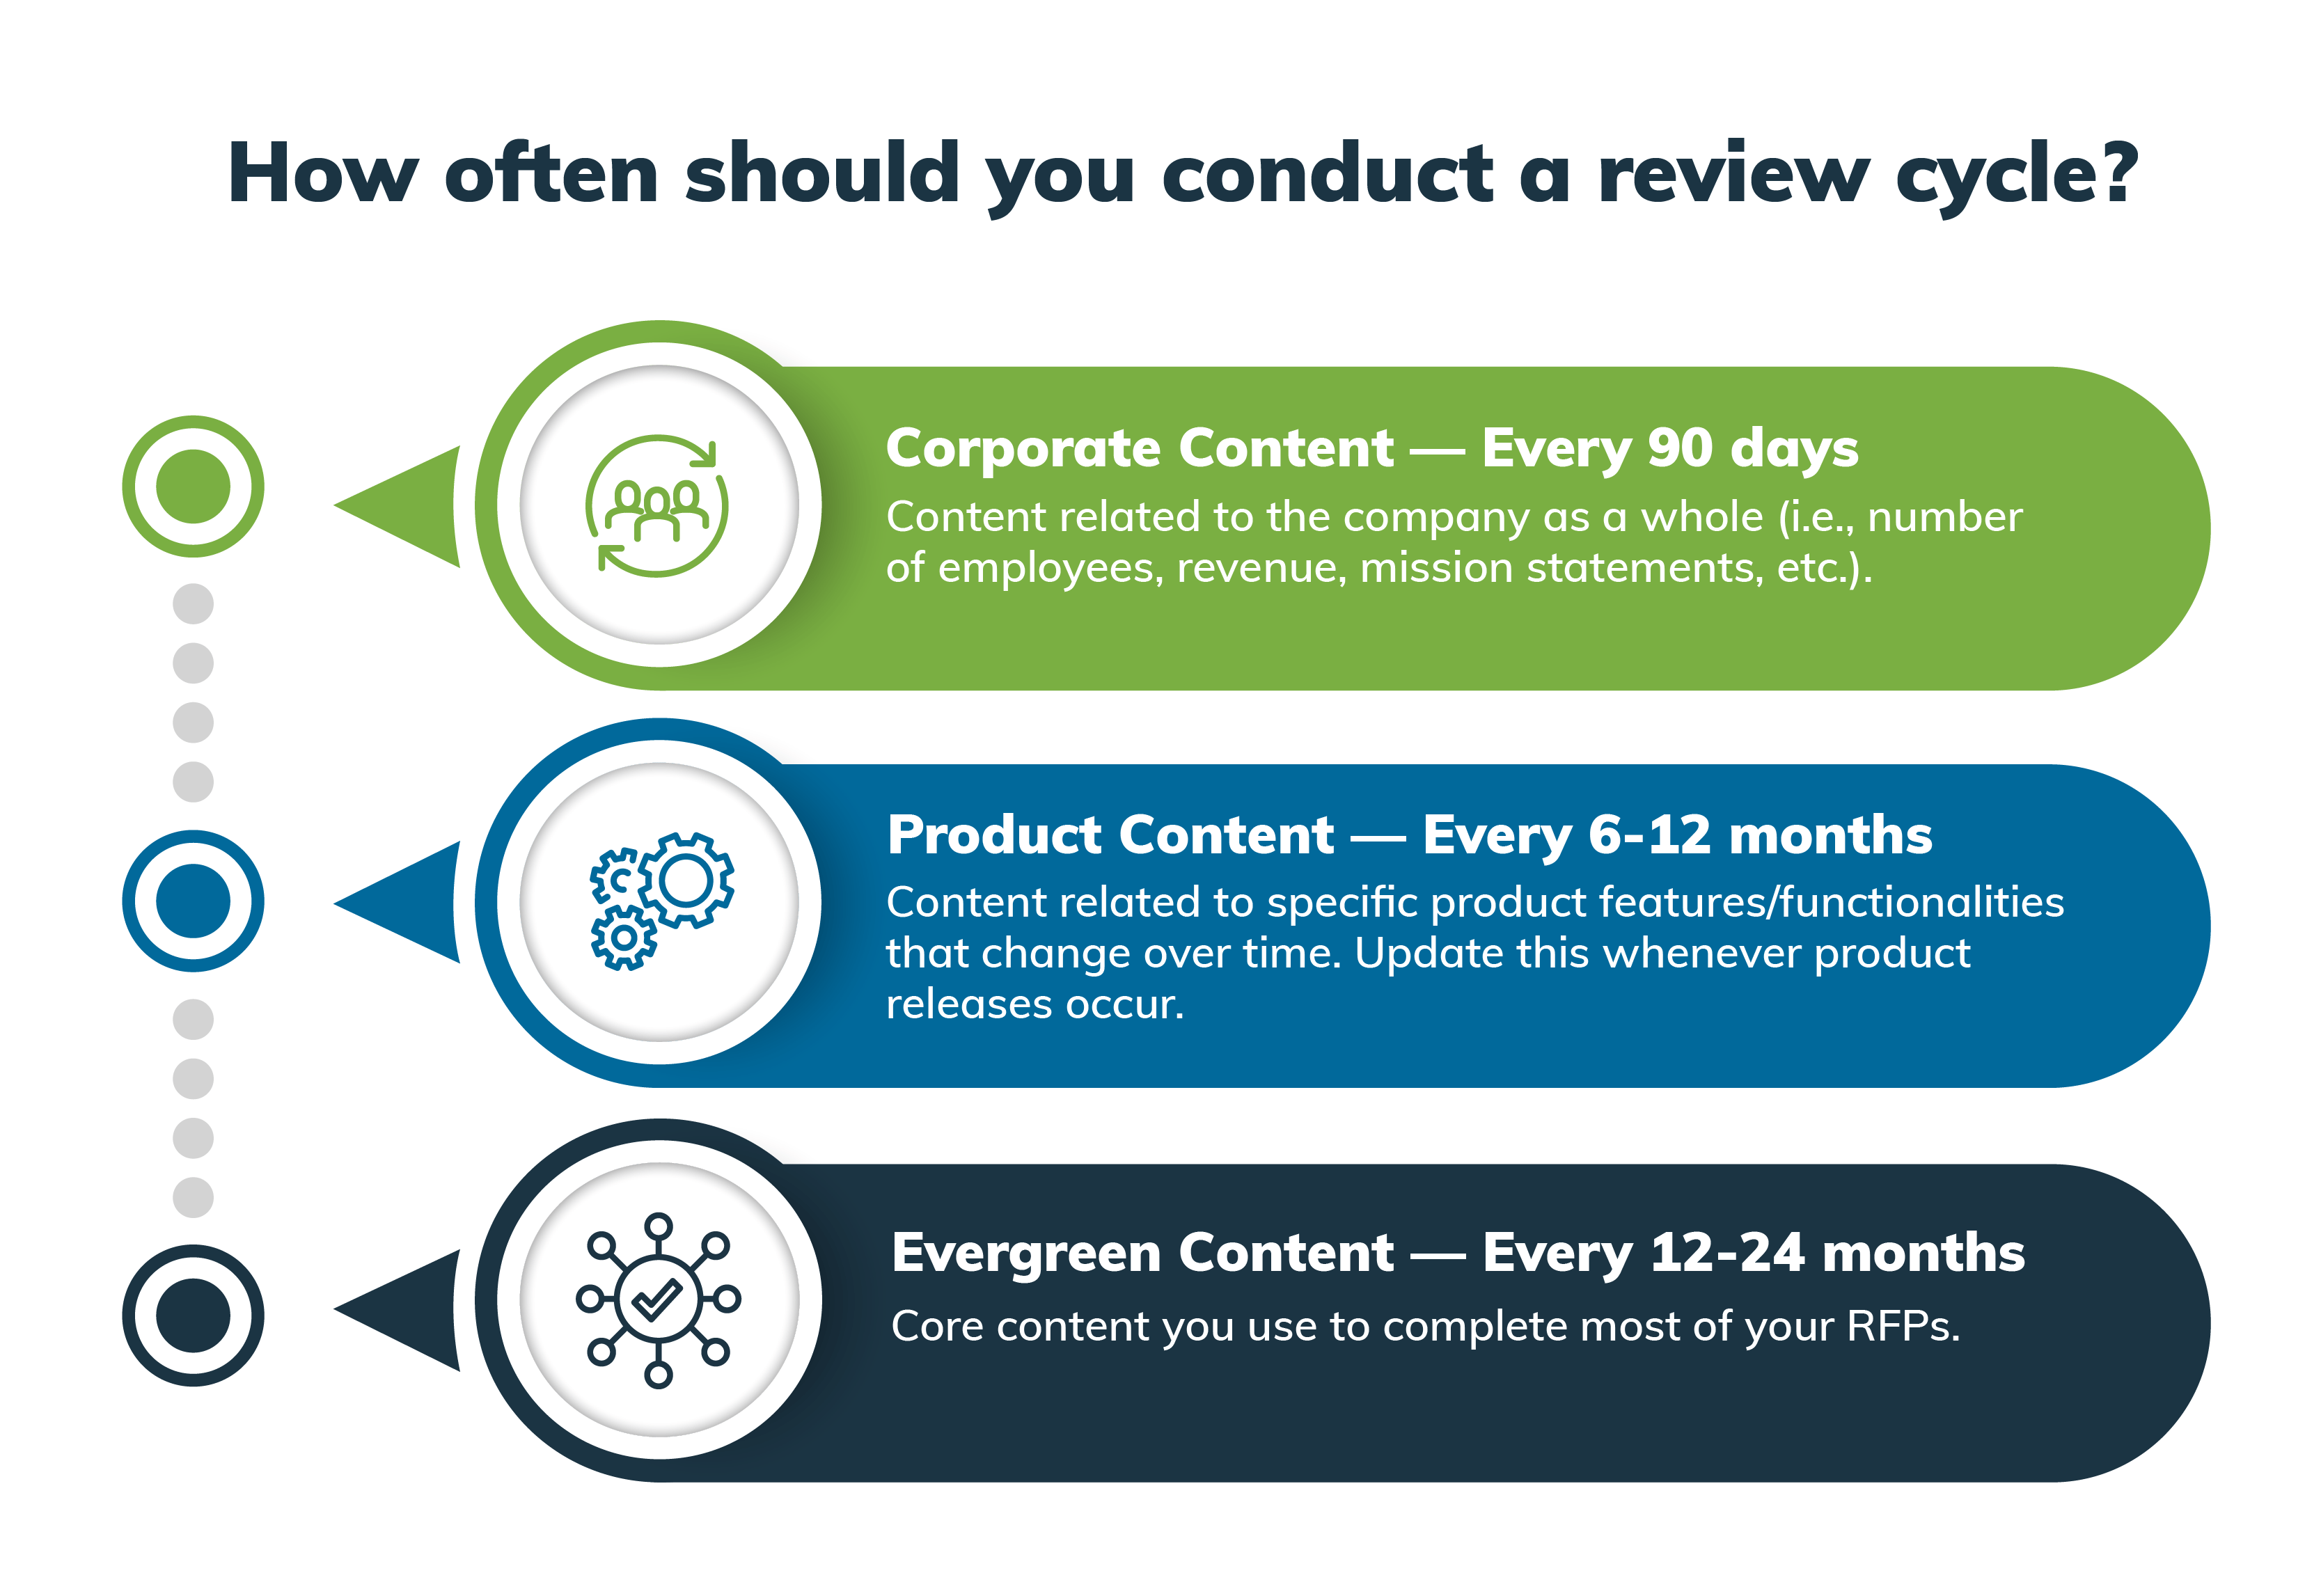 How often should you conduct a review cycle? It depends on the content.